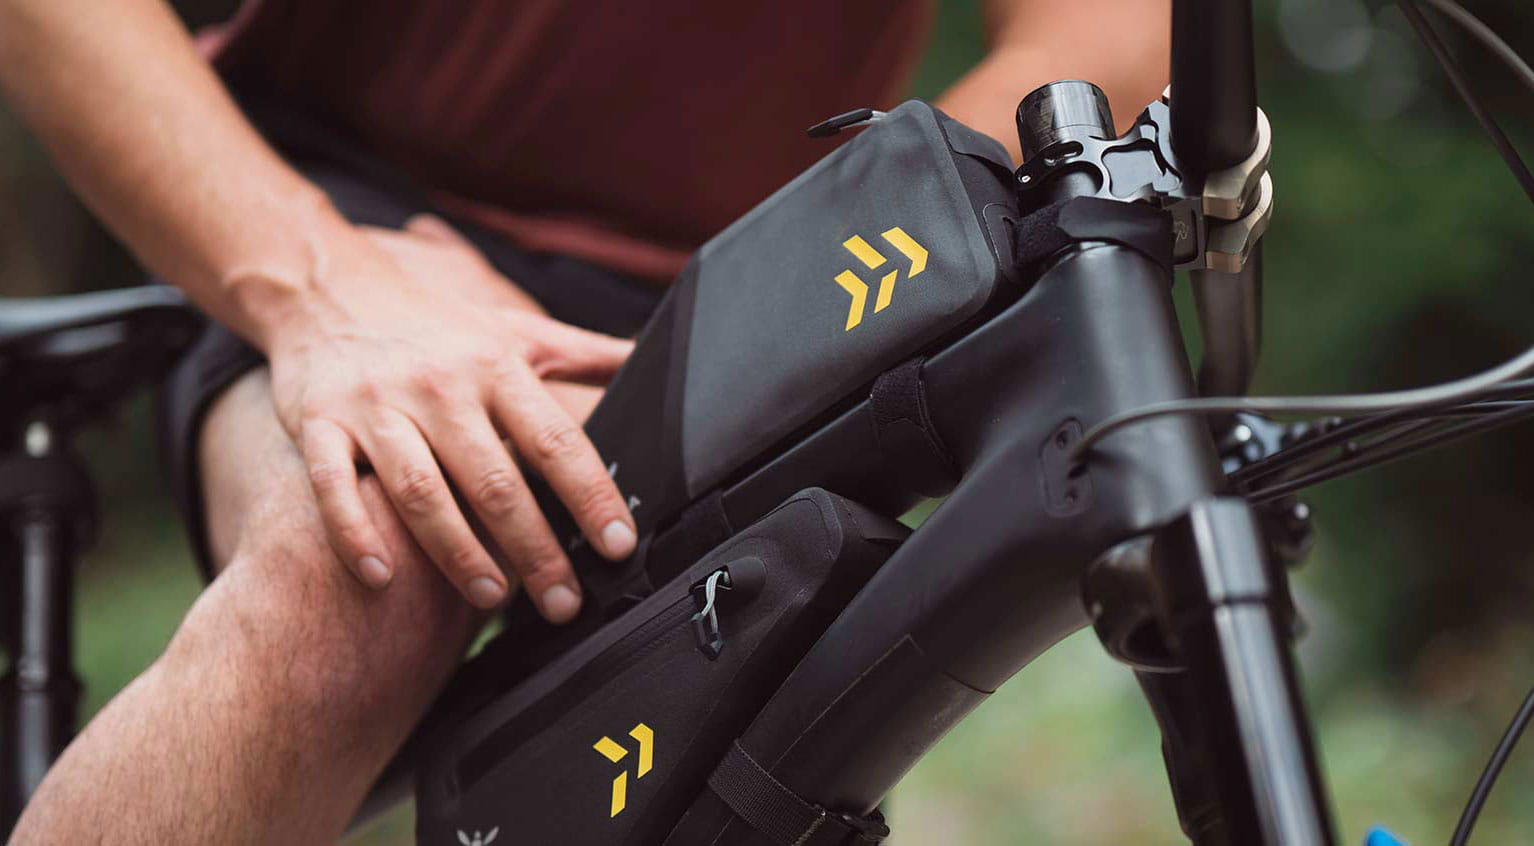 Apidura Backcountry Top Tube Pack 1L